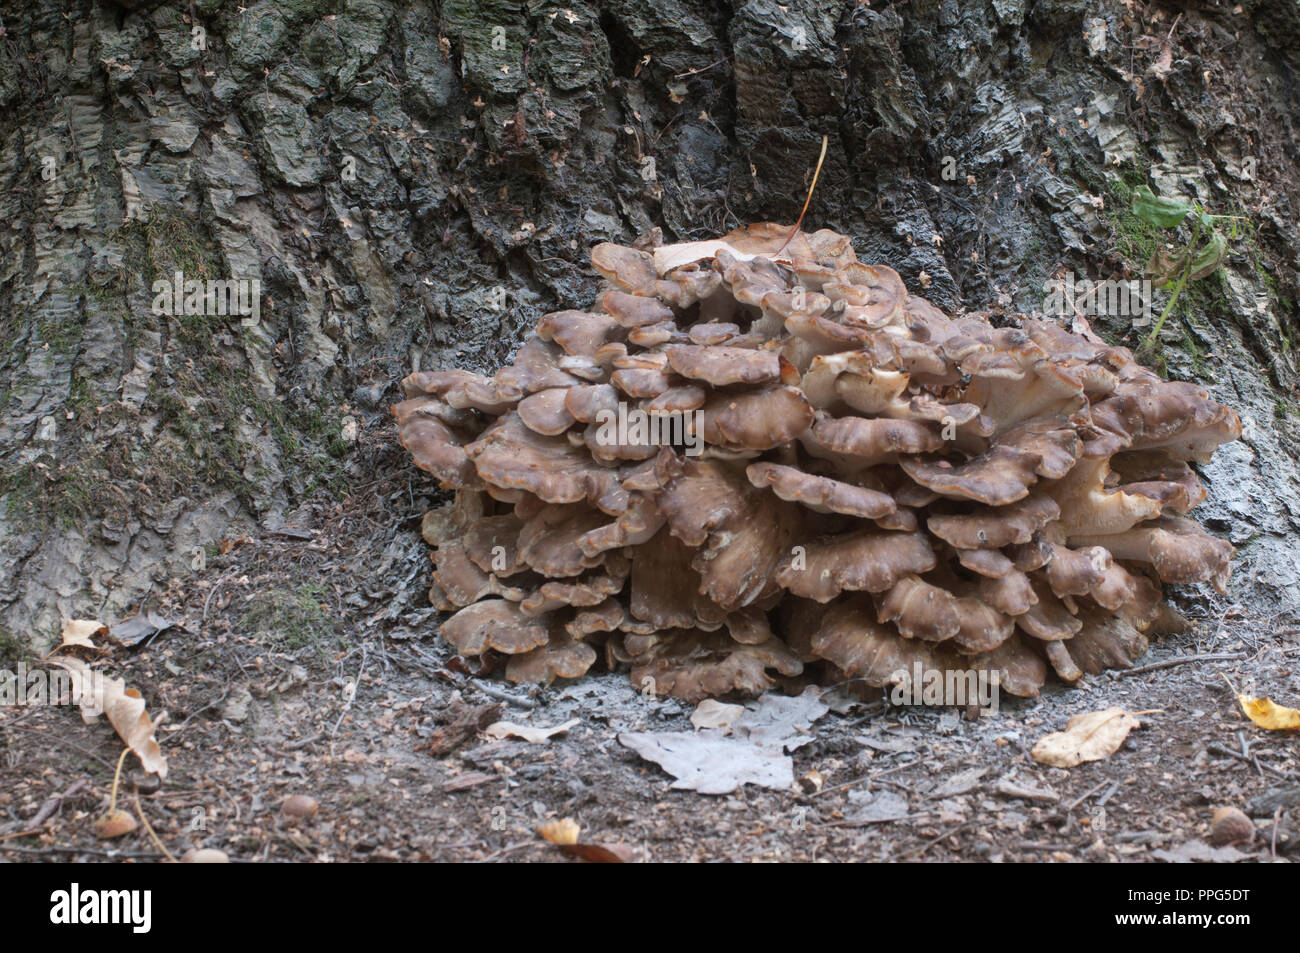 Grifola frondosa, edible polyporus mushroom whide khown in Far East and North America. Stock Photo